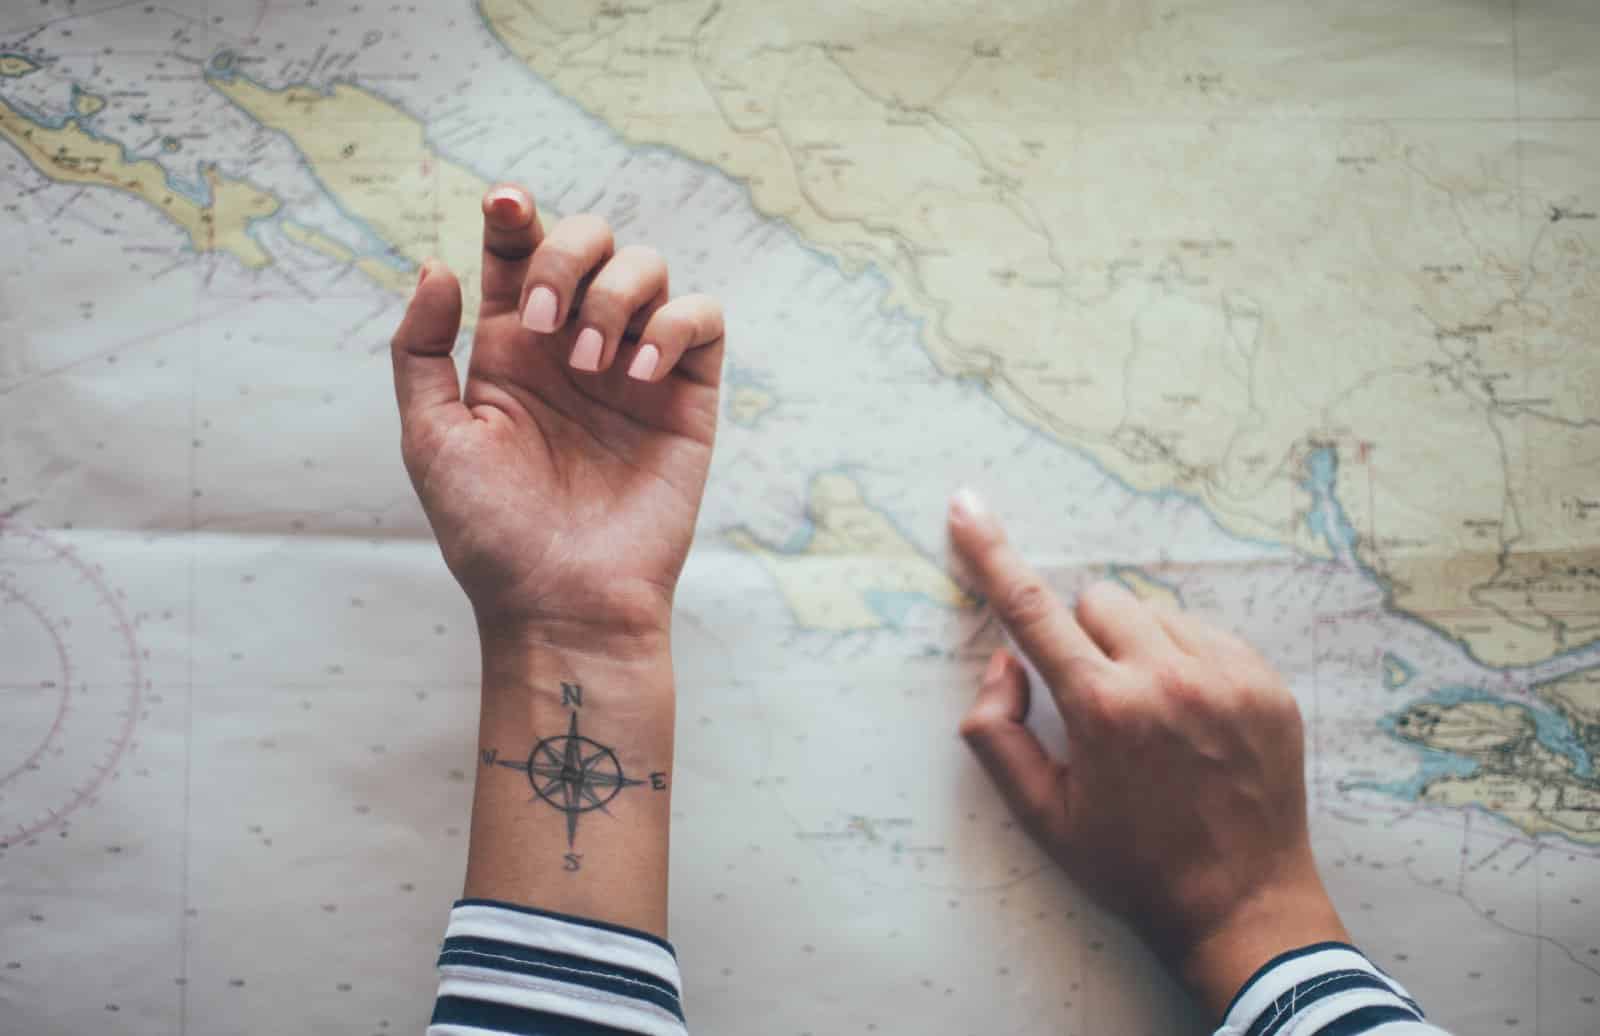 <p class="wp-caption-text">Image Credit: Shutterstock / Popartic</p>  <p><span>The compass rose has long stood as a navigation symbol, guiding travelers across uncharted territories. When tattooed, this timeless emblem signifies a wanderer’s quest for exploration and the constant journey through life’s metaphorical compass points. It’s a reminder that you possess the innate ability to find your way no matter where you are.</span></p> <p><b>Insider’s Tip:</b><span> Opt for a design that integrates personal elements or destinations that hold special meaning to you. Customizing the compass points to represent significant locations can add a layer of personal significance to your tattoo.</span></p>